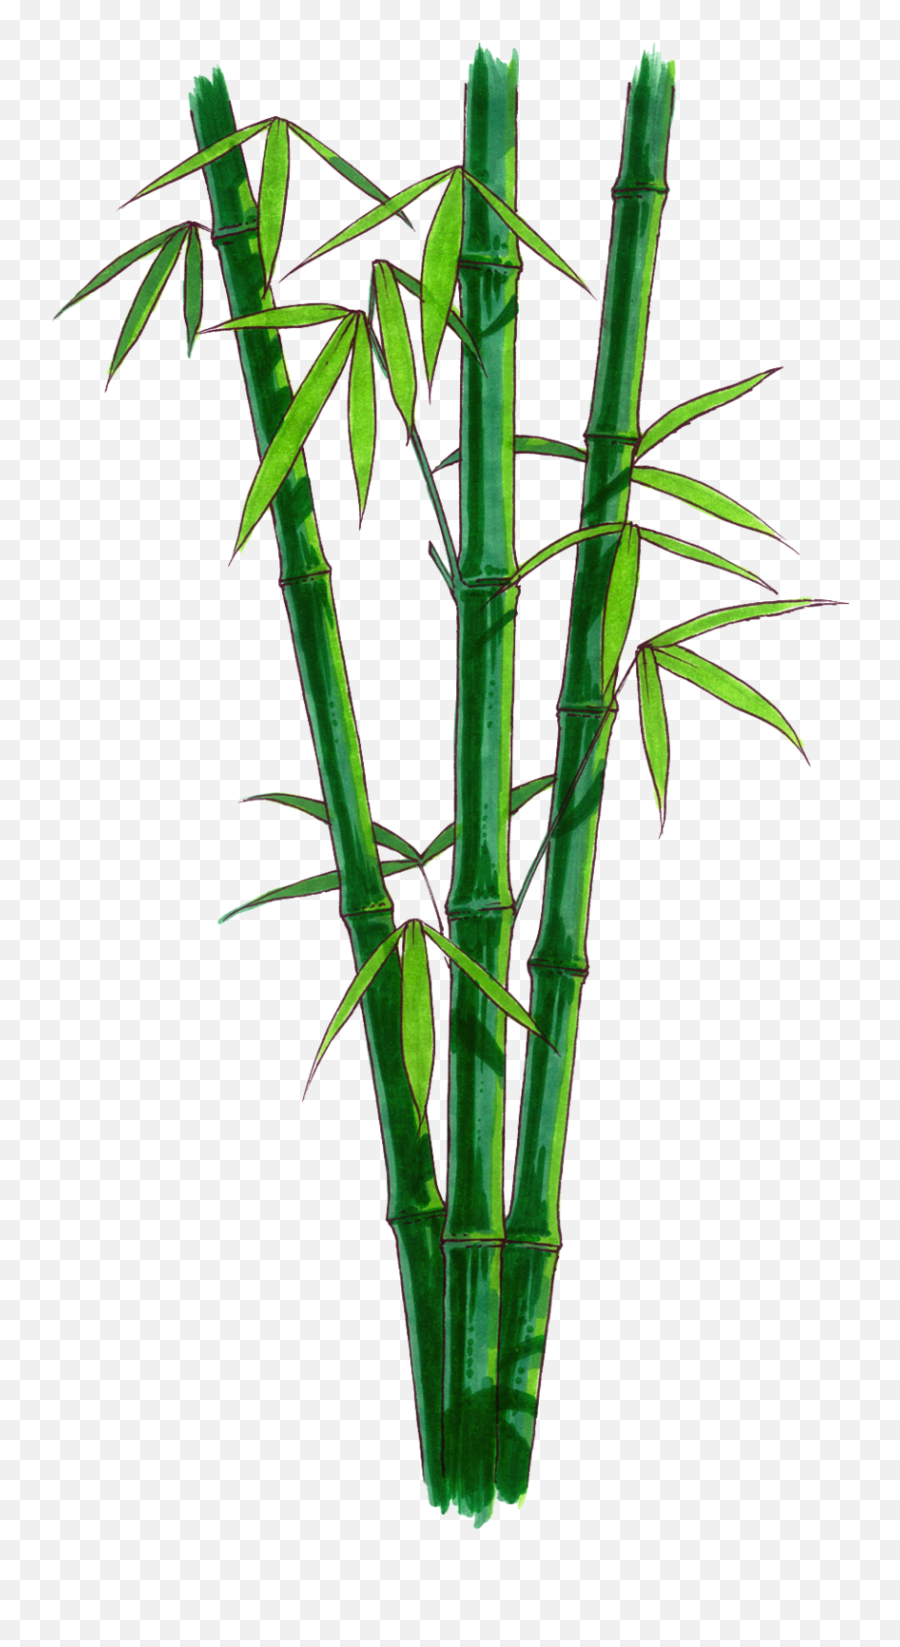 84 Bamboo Png Images Are Available Free - Transparent Bamboo Png,Bamboo Leaves Png